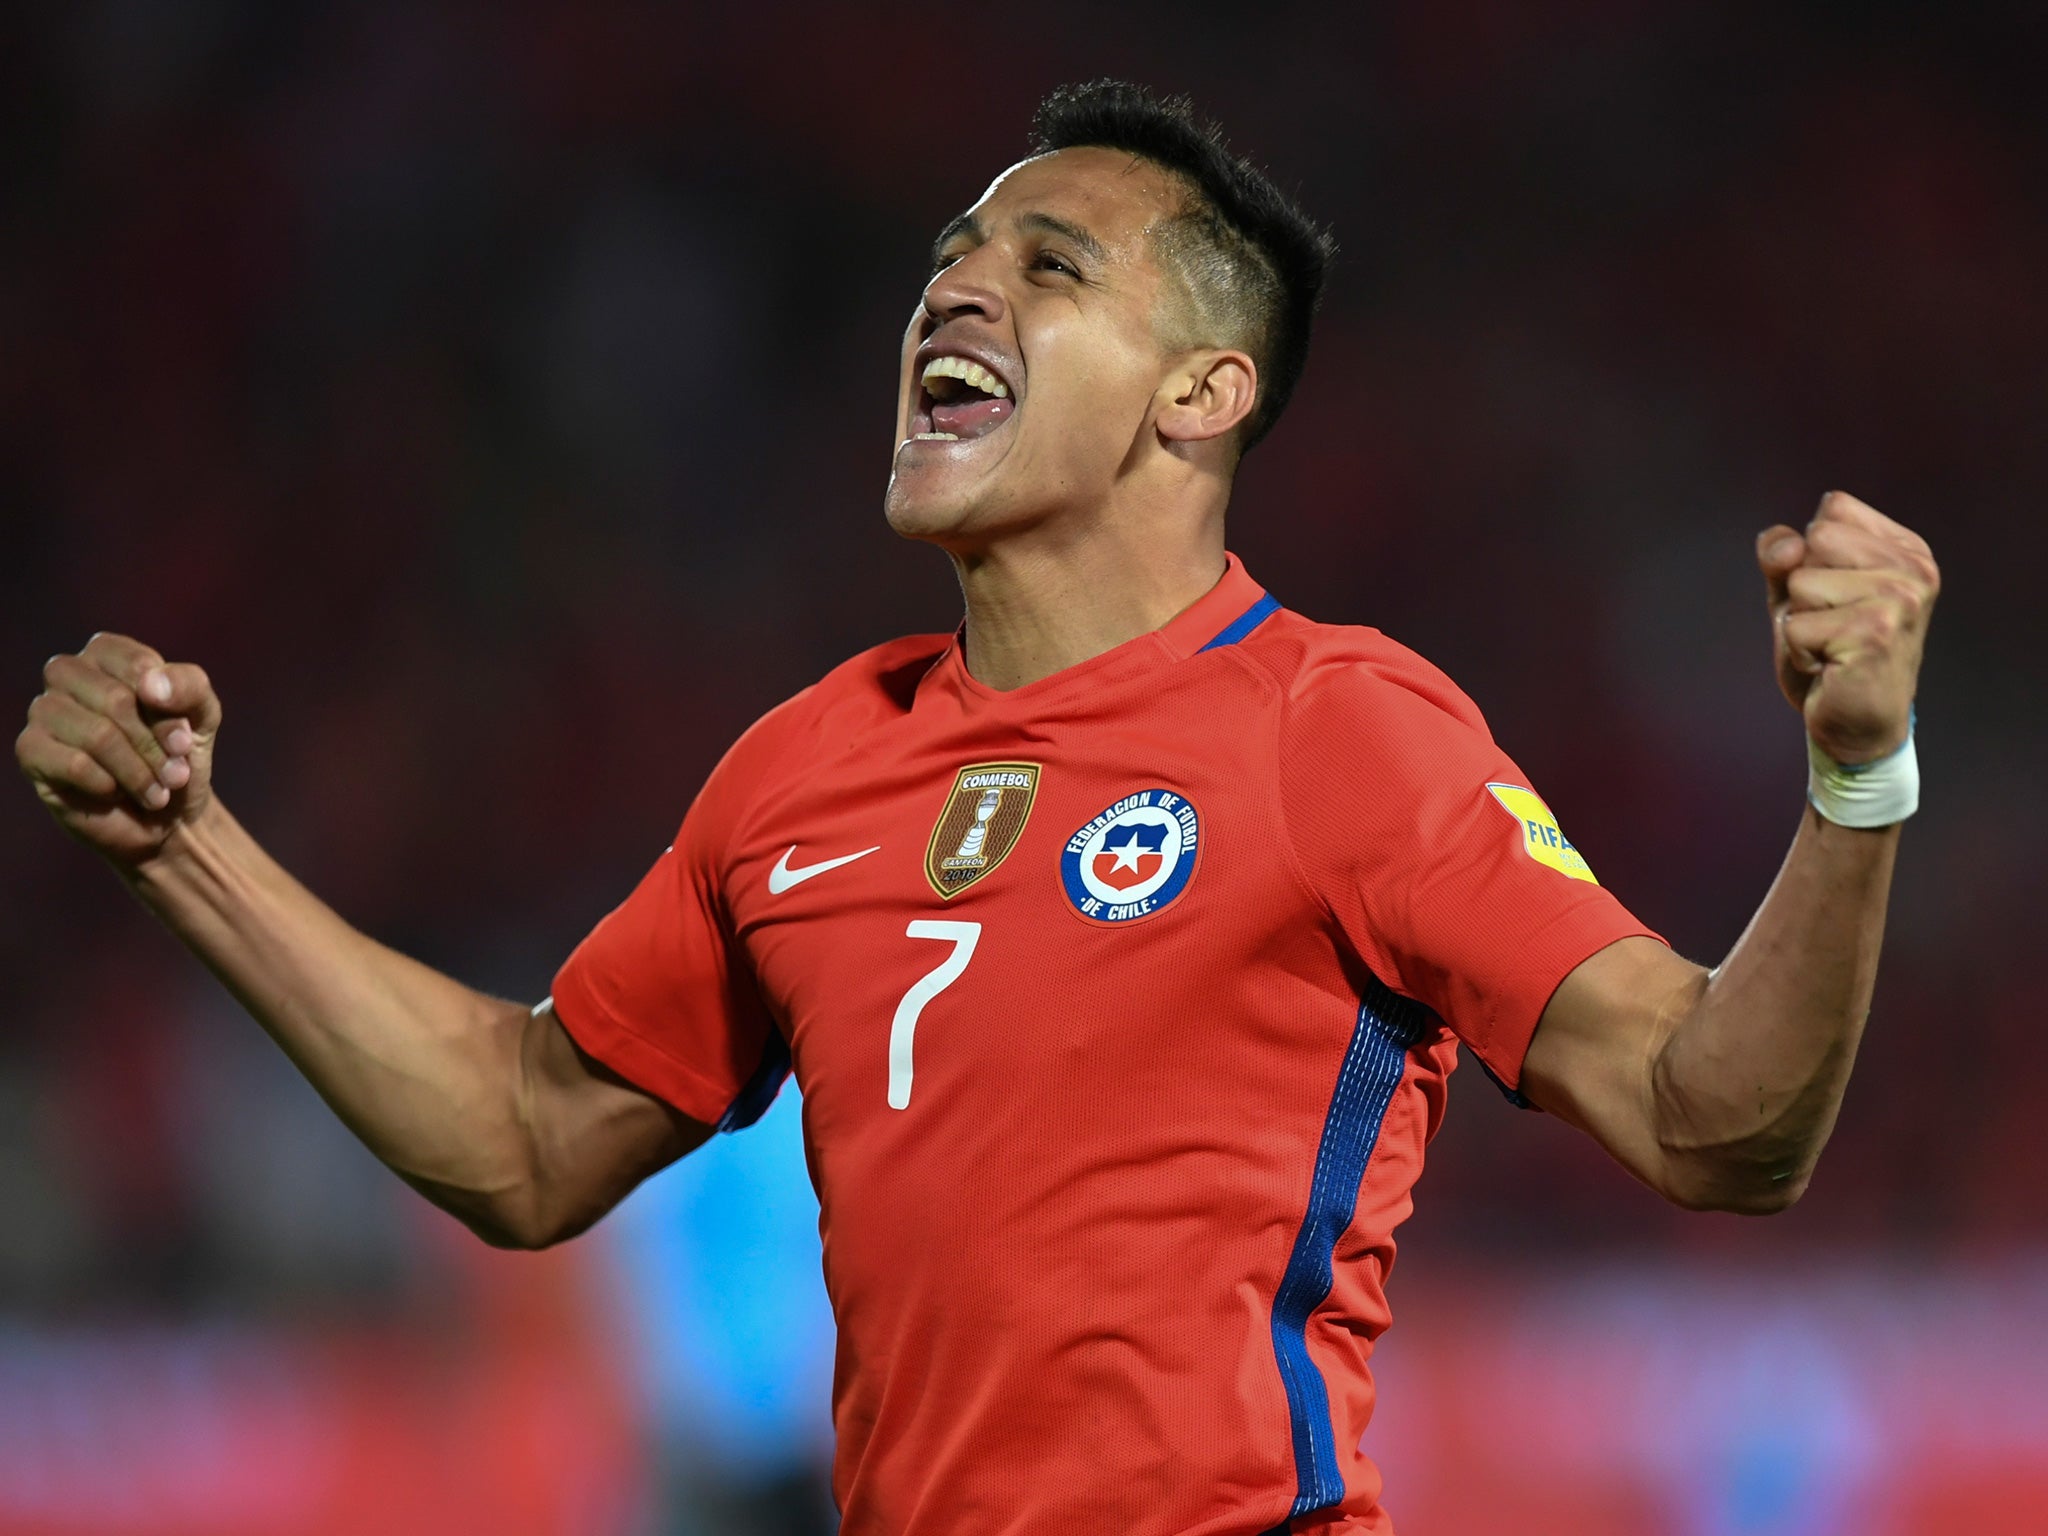 Sanchez scored twice in Chile's 3-1 win over Uruguay on Tuesday